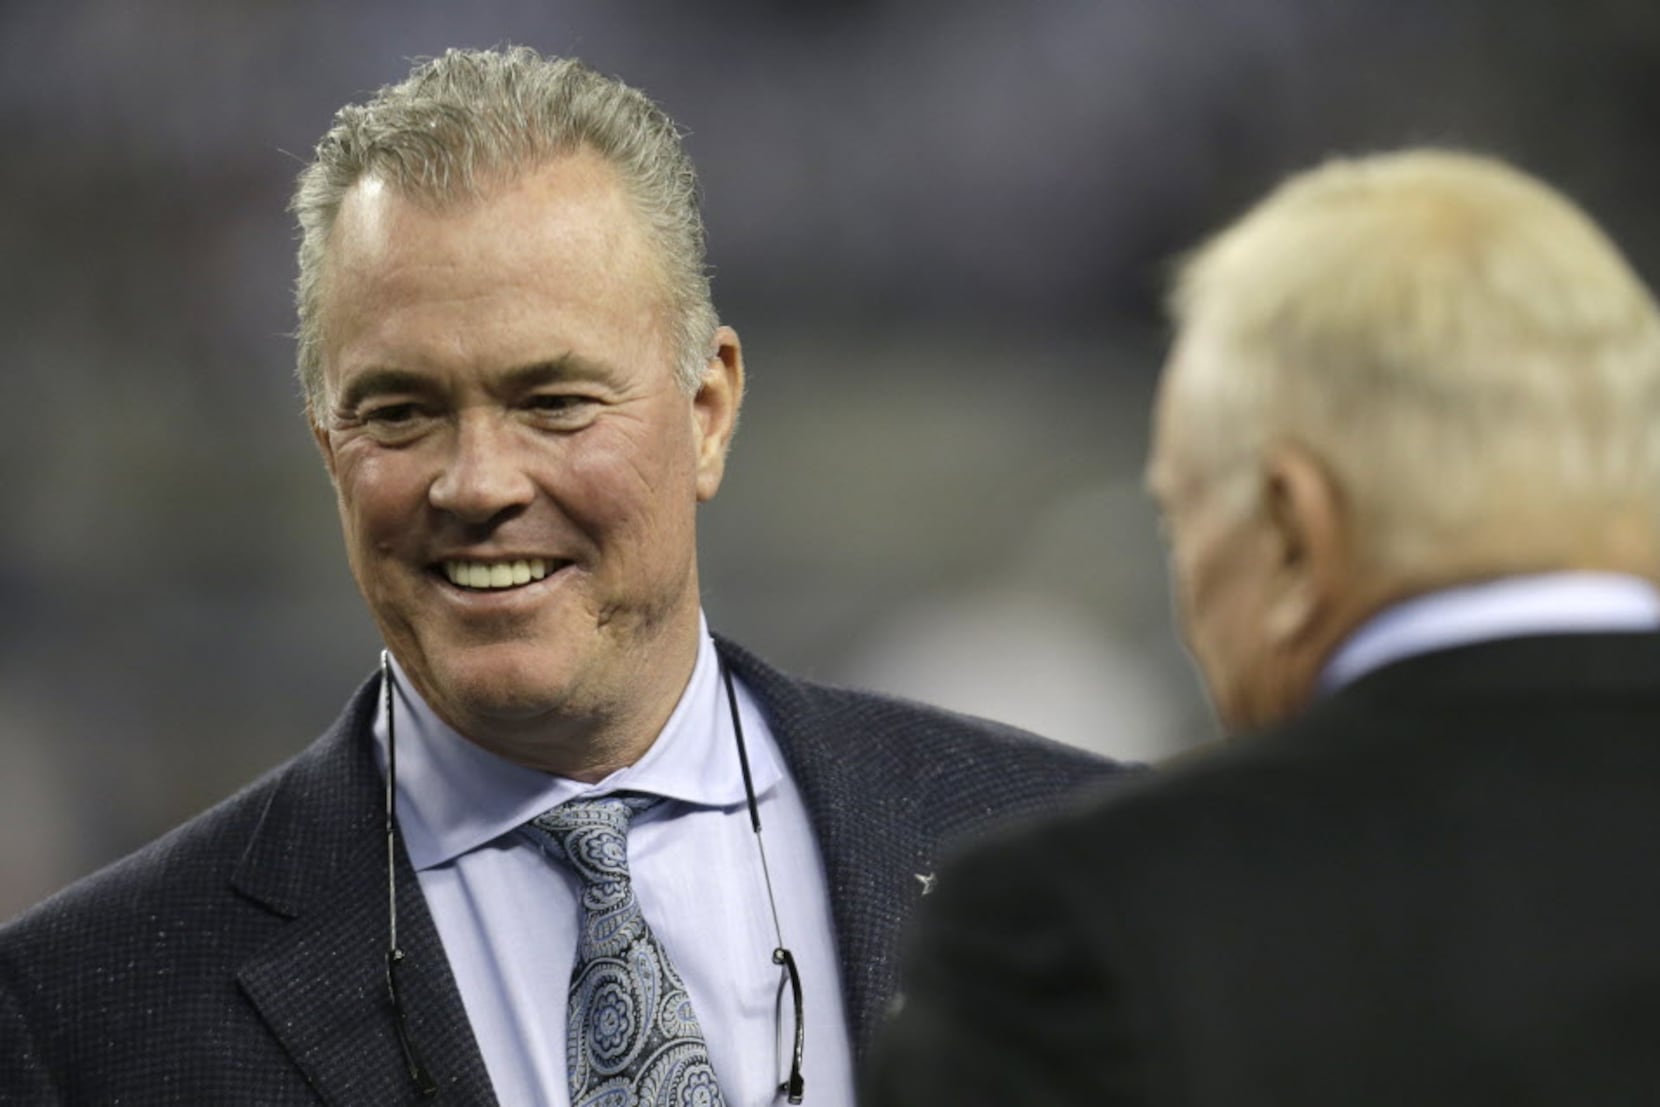 10 things you might not know about Stephen Jones: The story of Martin over  Manziel, pushing Jerry against a wall over Deion